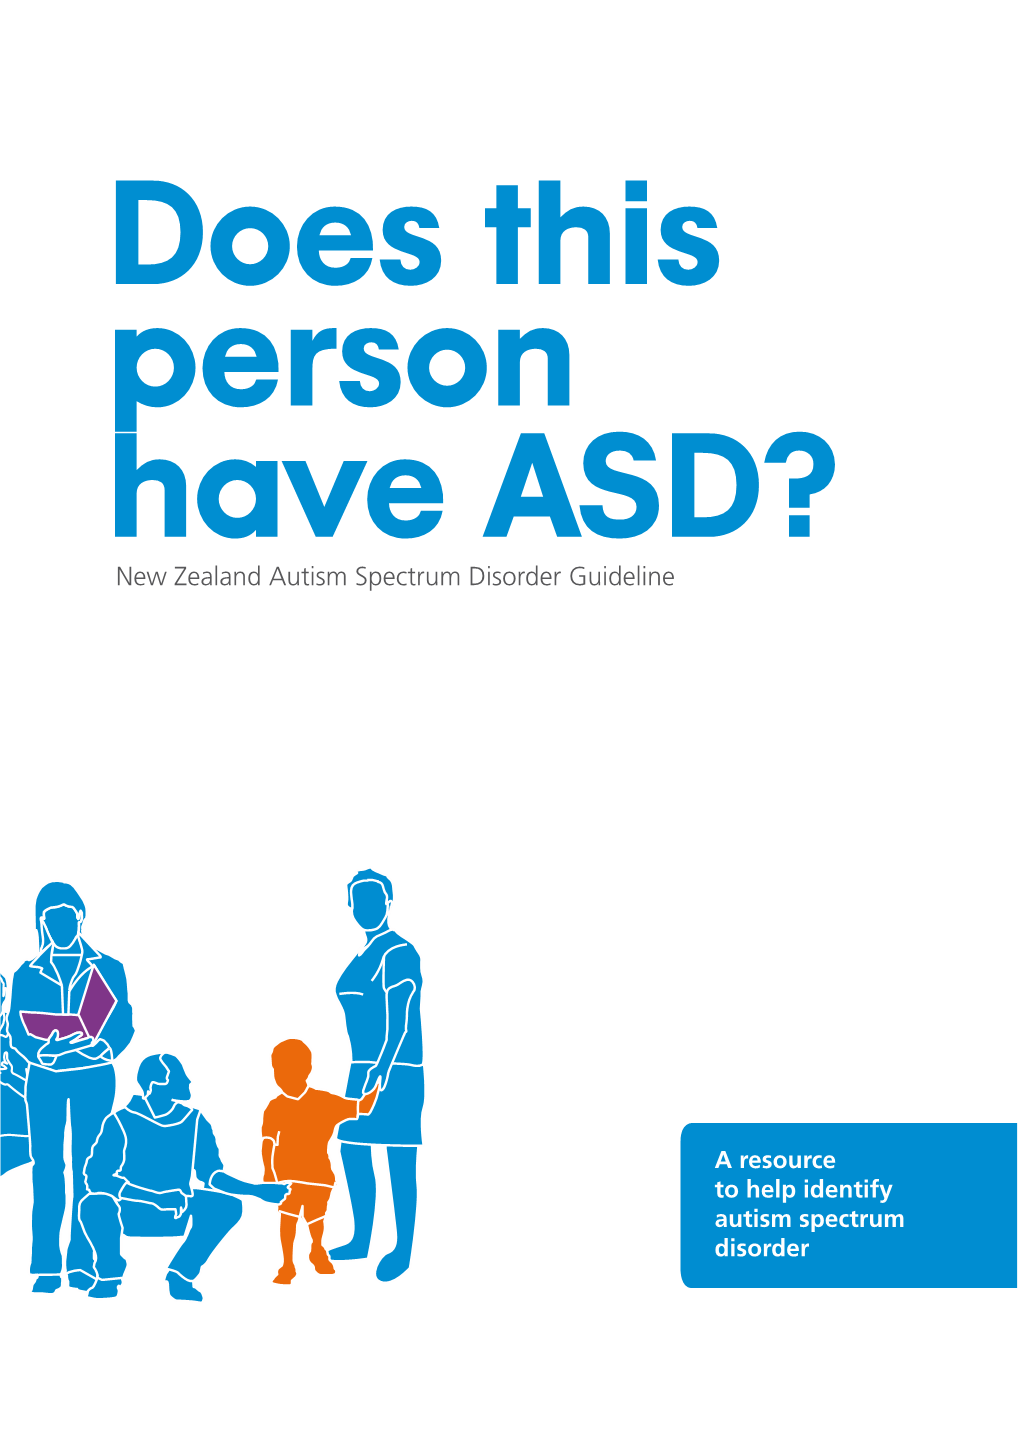 Does This Person Have ASD? New Zealand Autism Spectrum Disorder Guideline